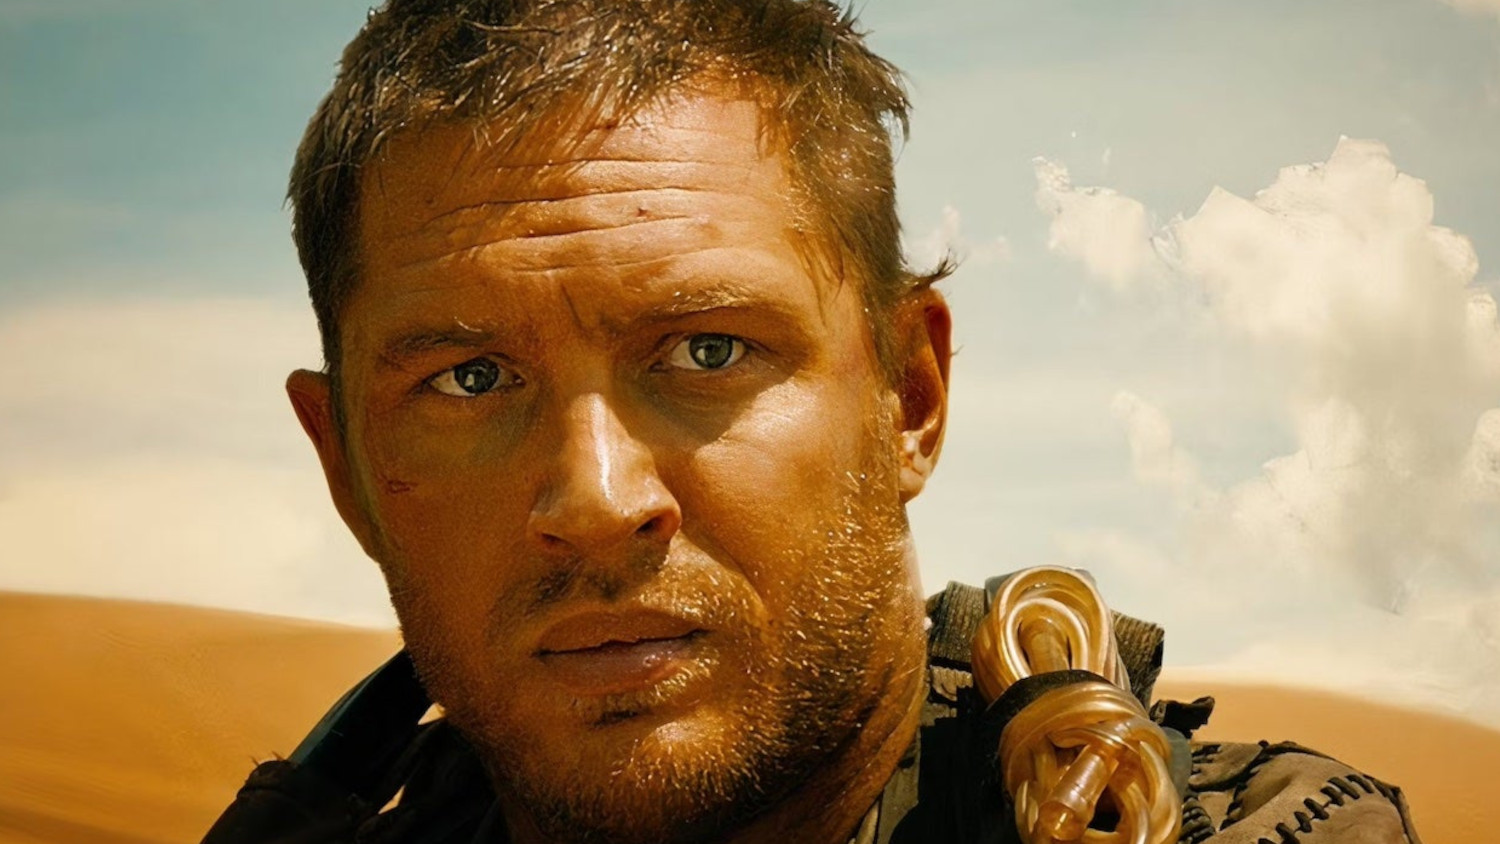 ‘Furiosa’ Fallout Continues: Tom Hardy Doubts Third ‘Mad Max’ Movie Will Happen